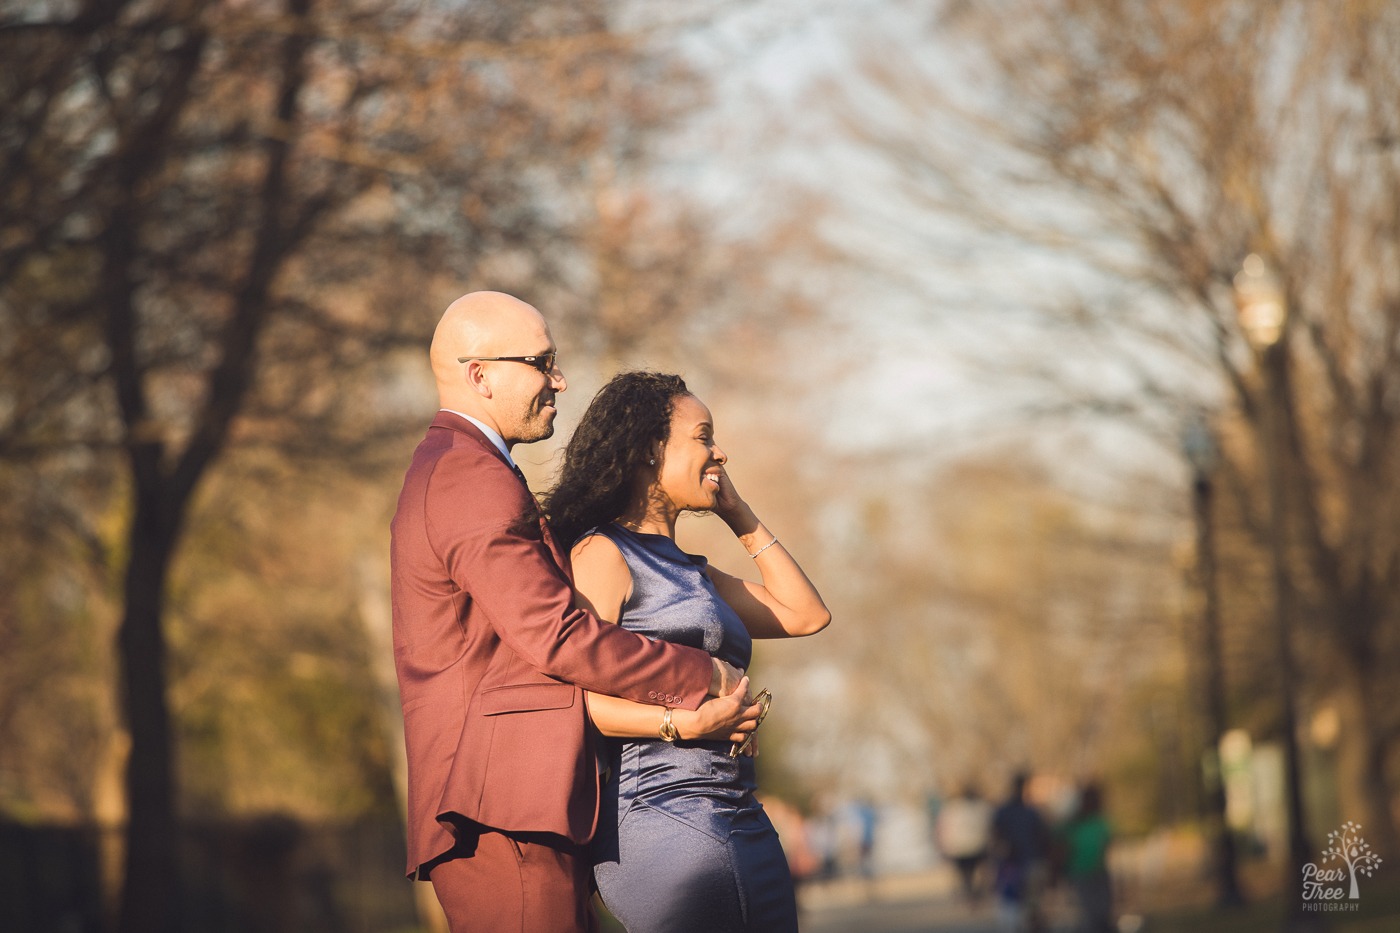 African American couple dancing and smiling in Piedmont Park with the man wearing sunglasses and woman brushing her hair out of her face